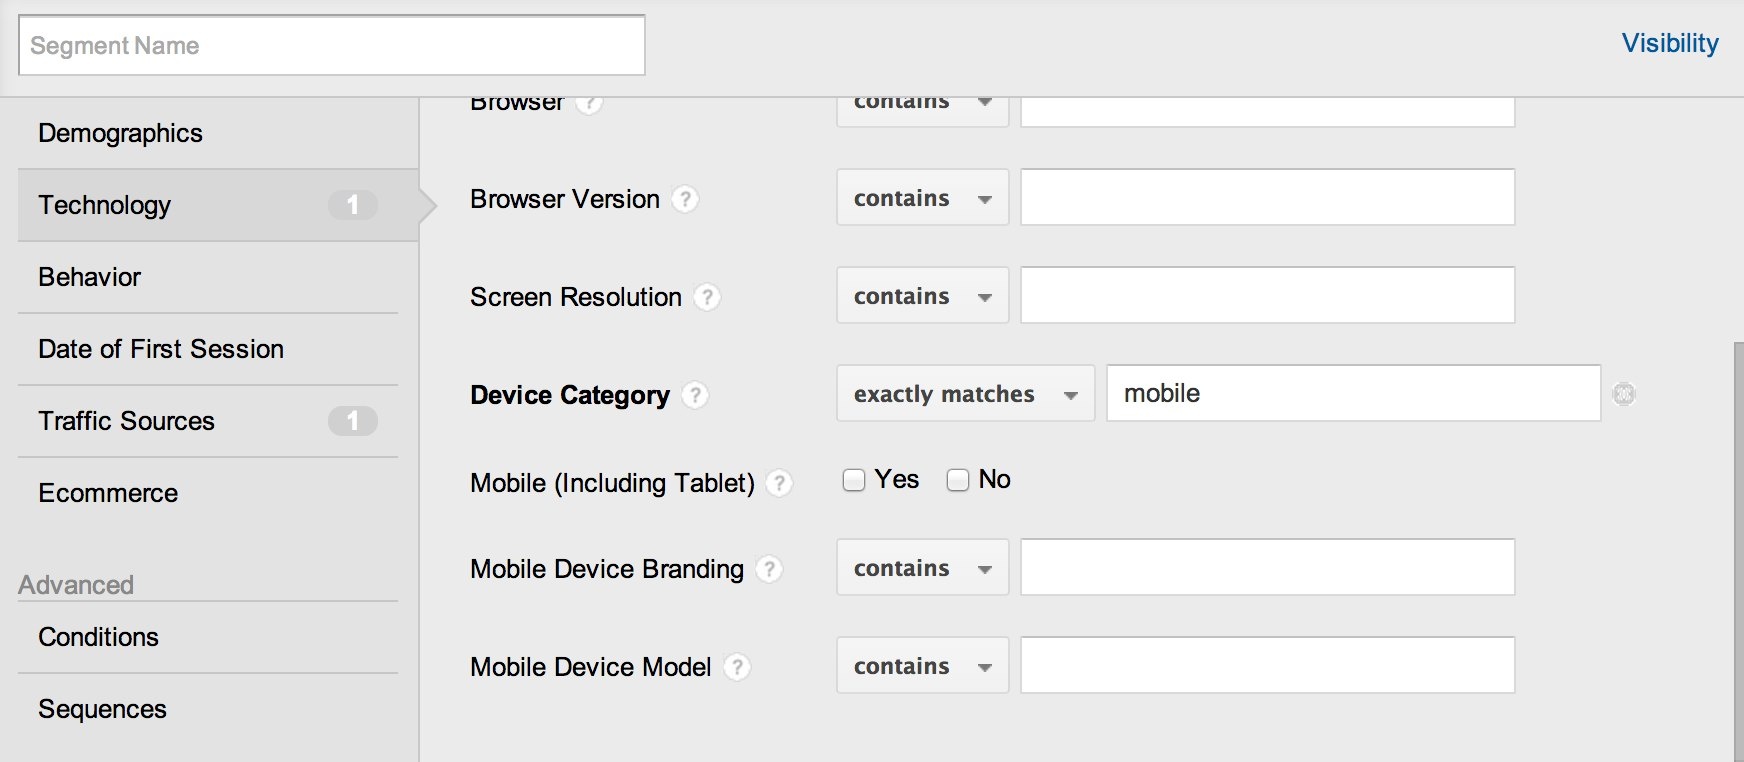 create segment with device category equals mobile